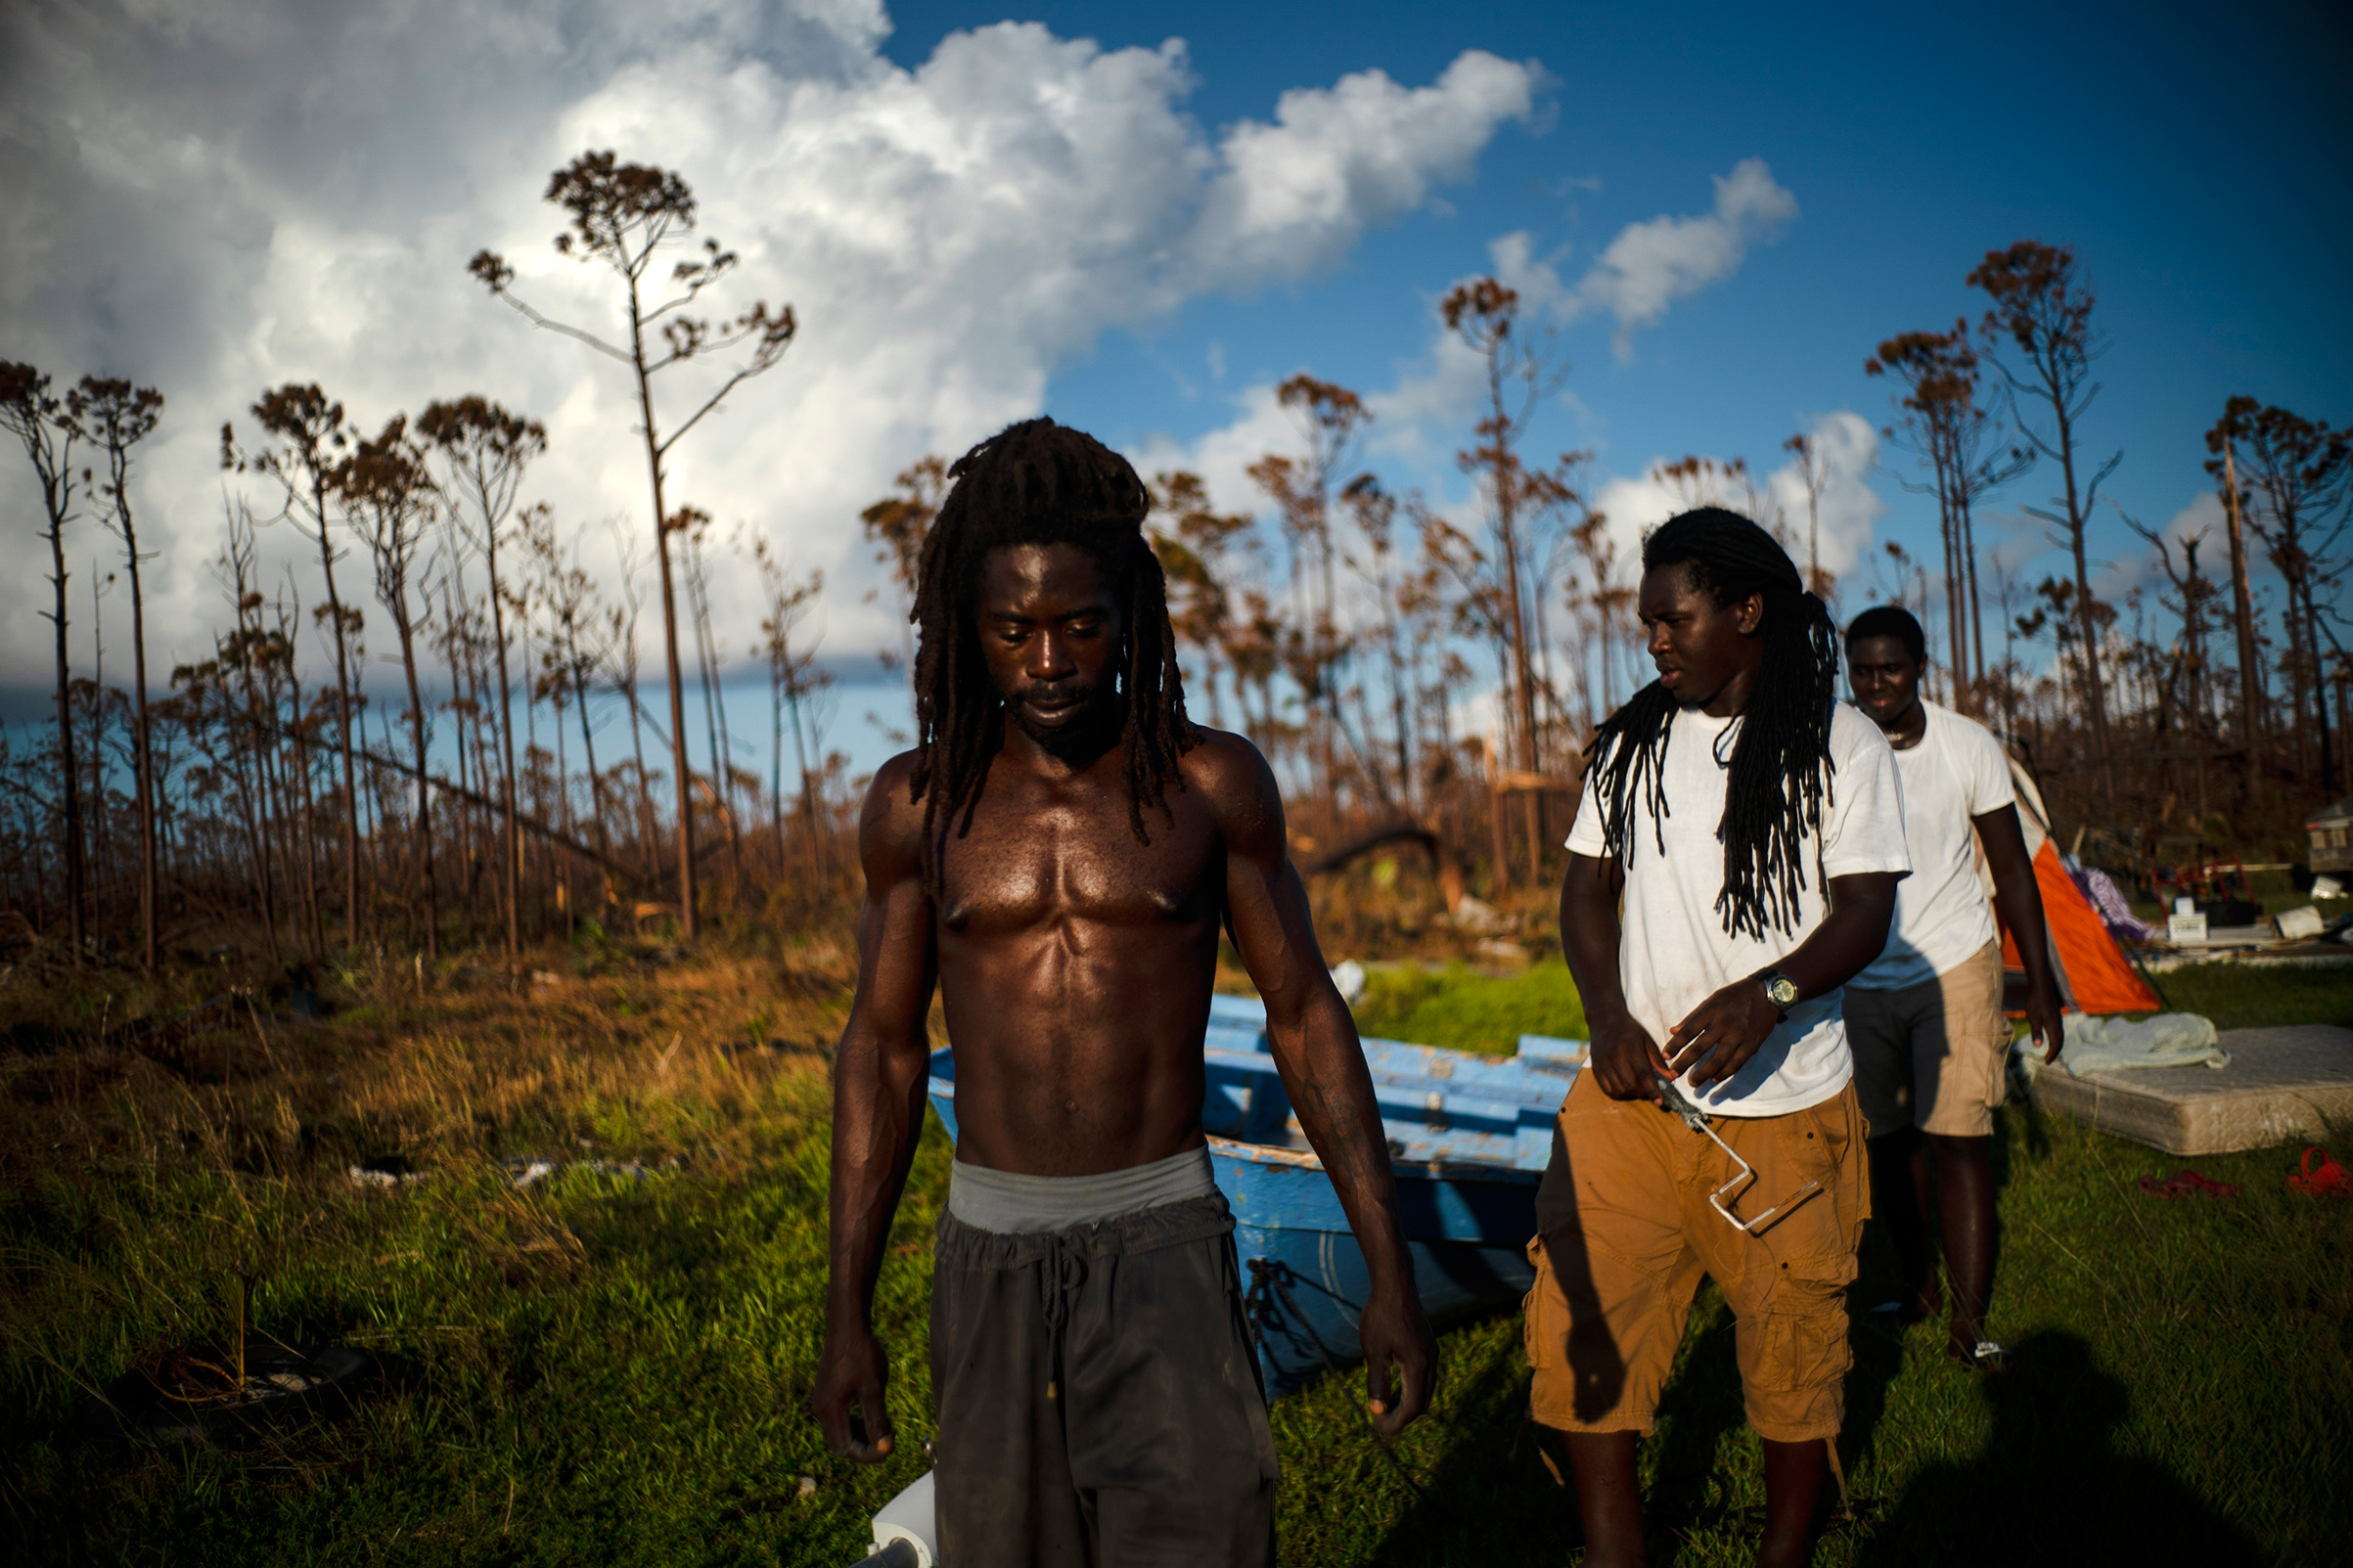 Dexter Edwards, front, his brother Nathanael Edwards right, and his cousin Valentino Ingraham walk amid one of their family's homes destroyed by Hurricane Dorian in Rocky Creek East End, Grand Bahama, Bahamas, Sept. 8, 2019. "Right now, ain't much joy. You just gotta try to keep your head up," Edwards said. "There's always a future. Only thing we can do right now is rebuild-rebuild and try to move forward." (Ramon Espinosa—AP)